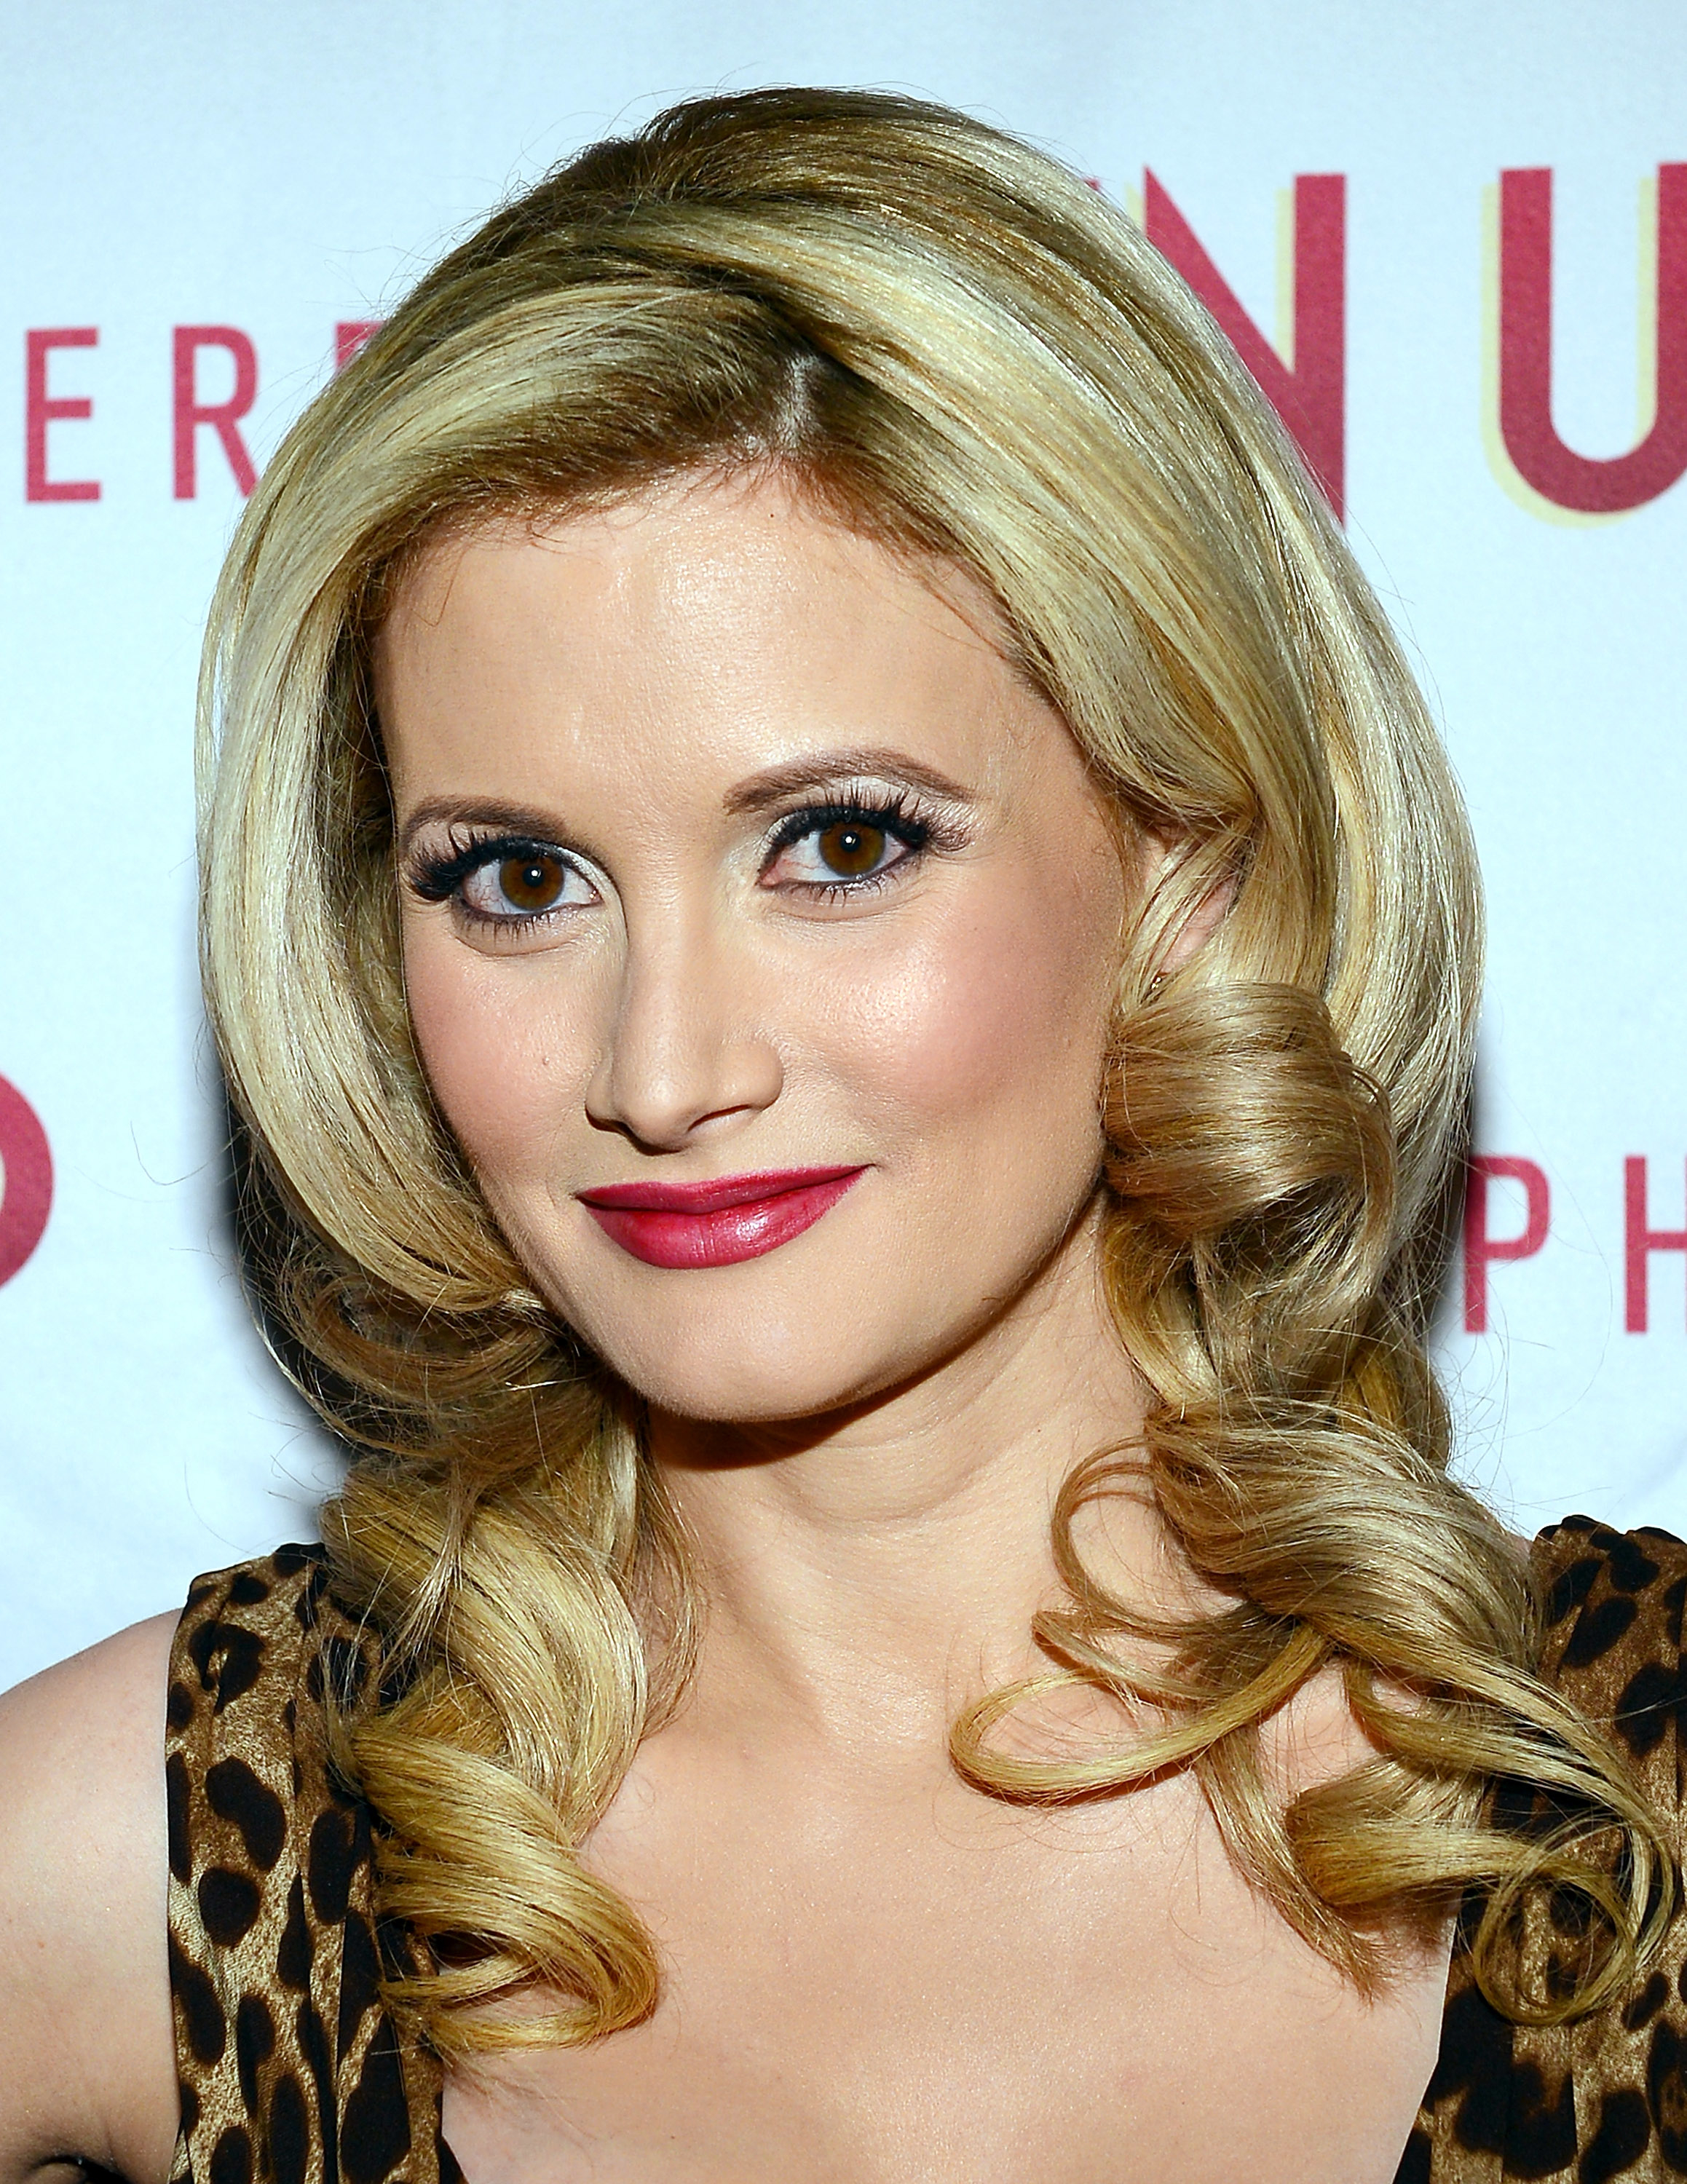 A closeup of Holly wearing red lipstick on the red carpet